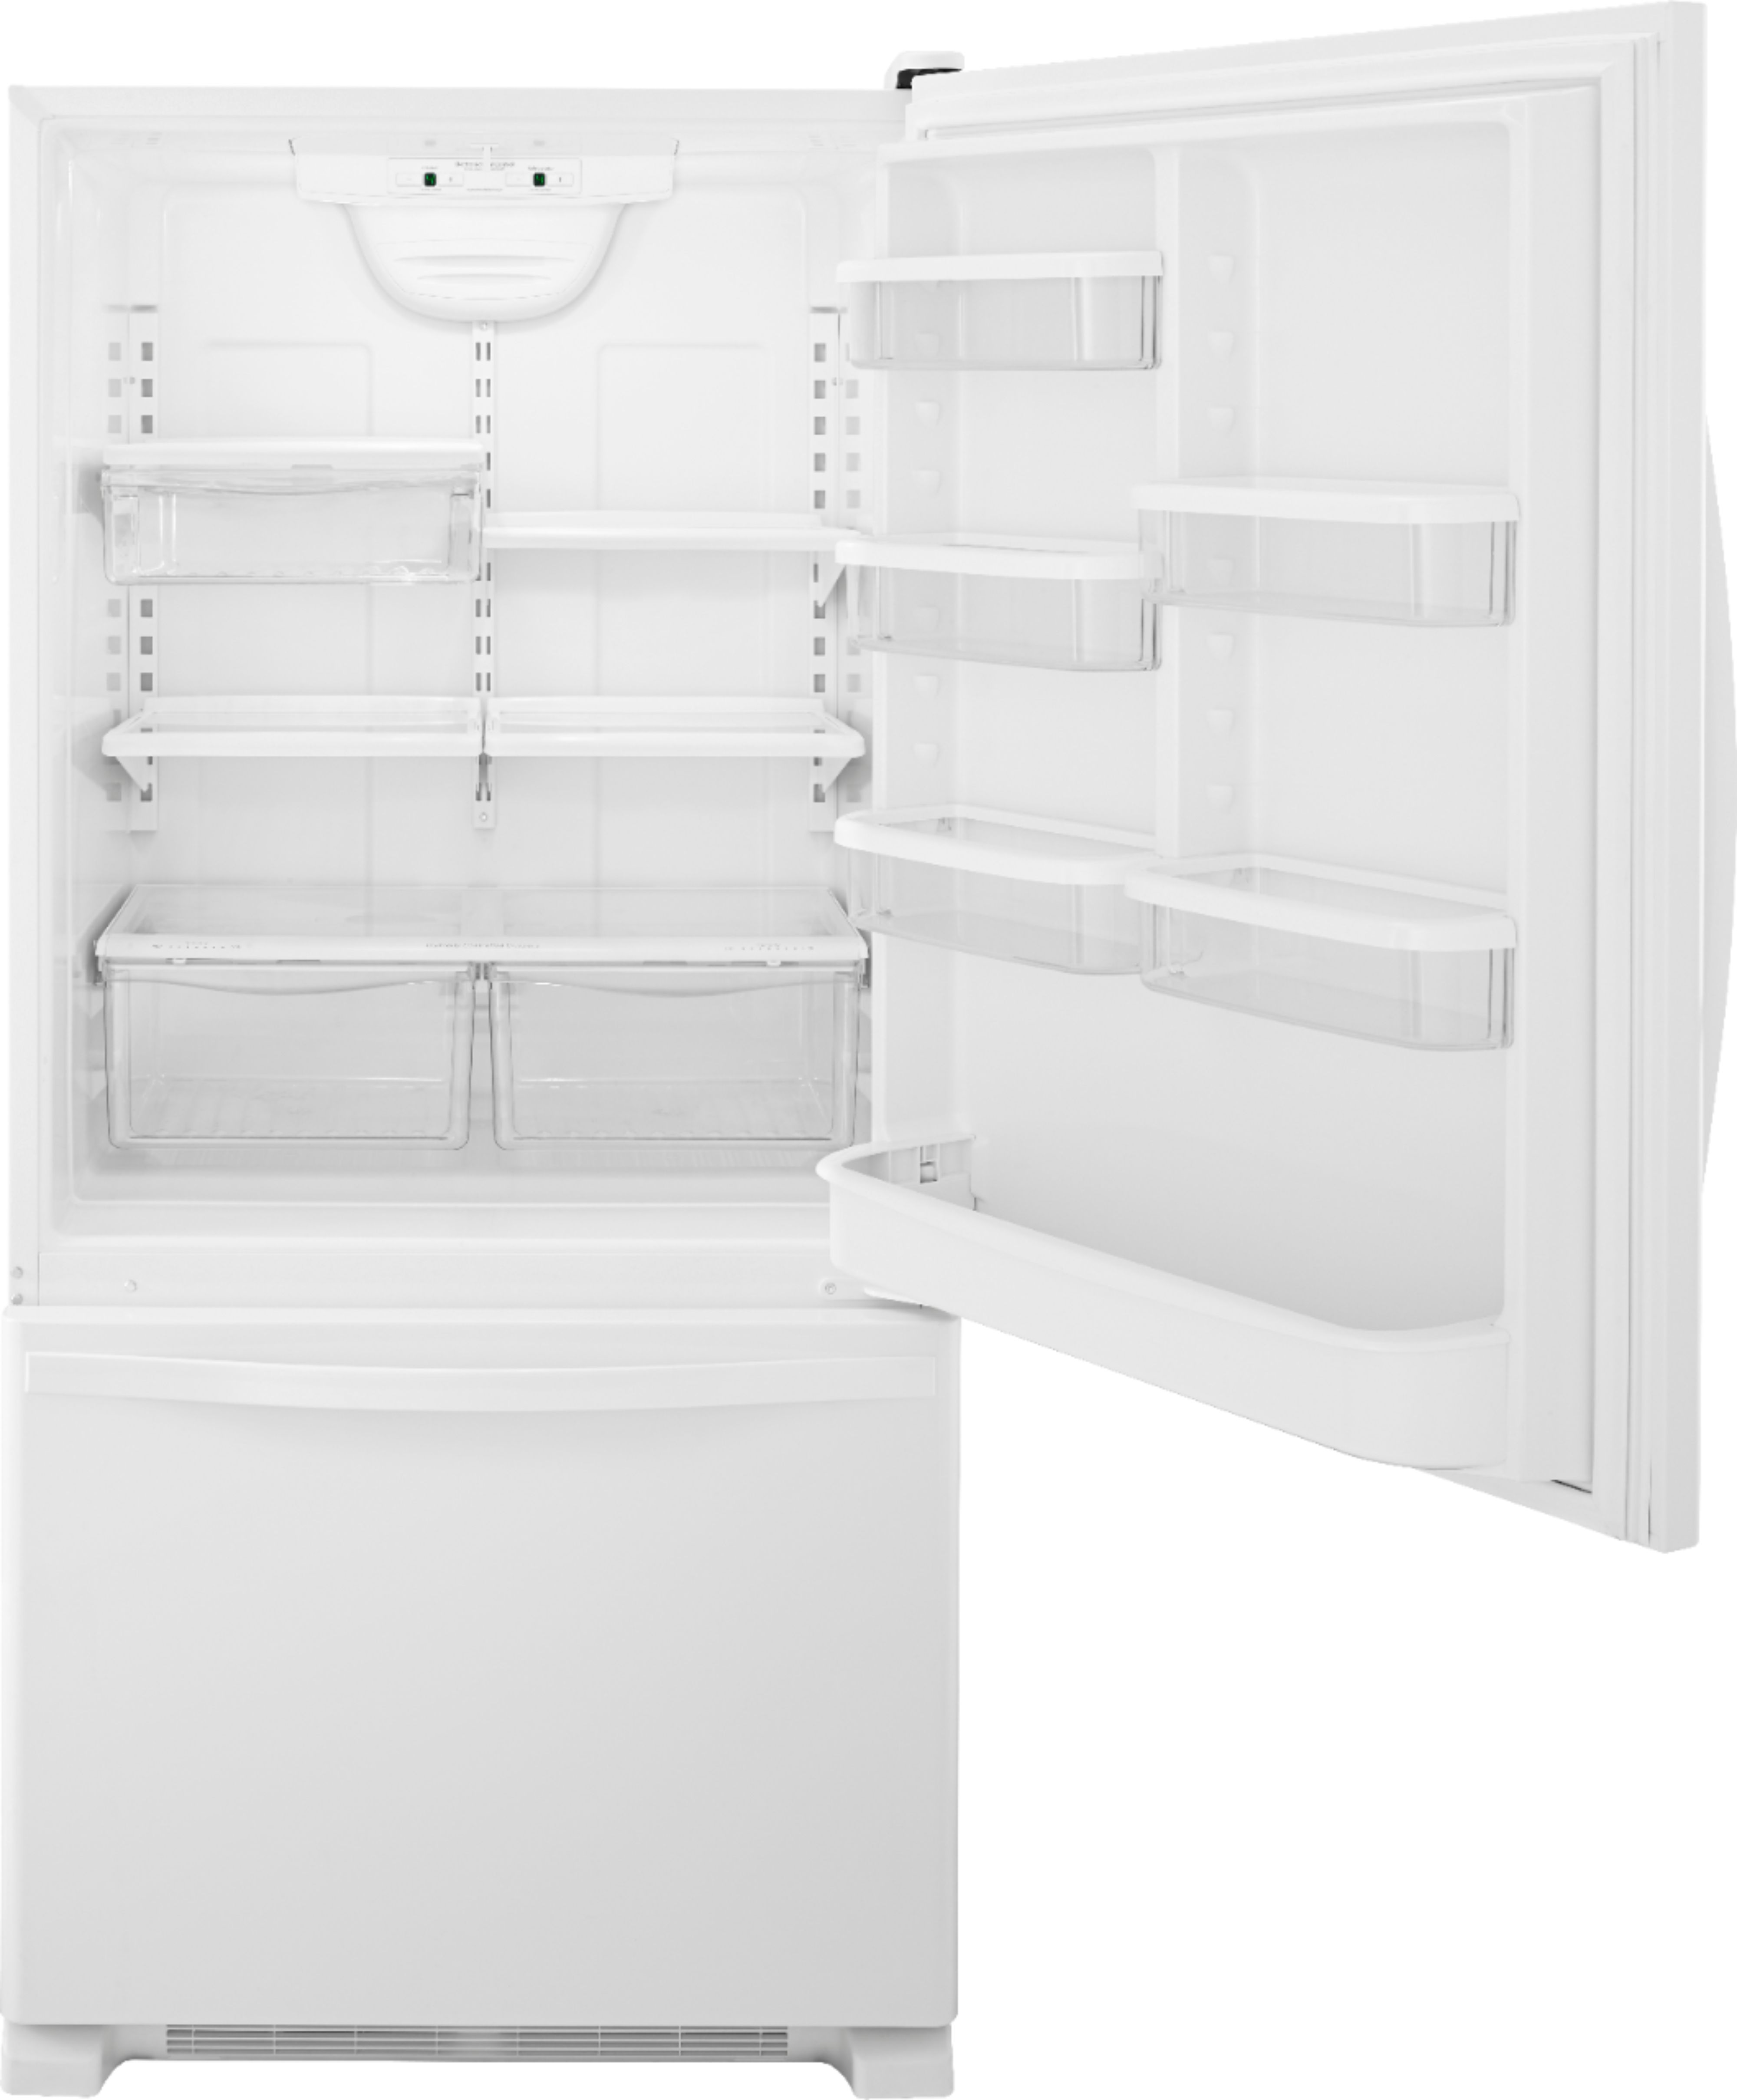 30-inches wide Bottom-Freezer Refrigerator with SpillGuard™ Glass Shelves -  18.7 cu. ft. Stainless Steel WRB329DMBM, Whirlpool